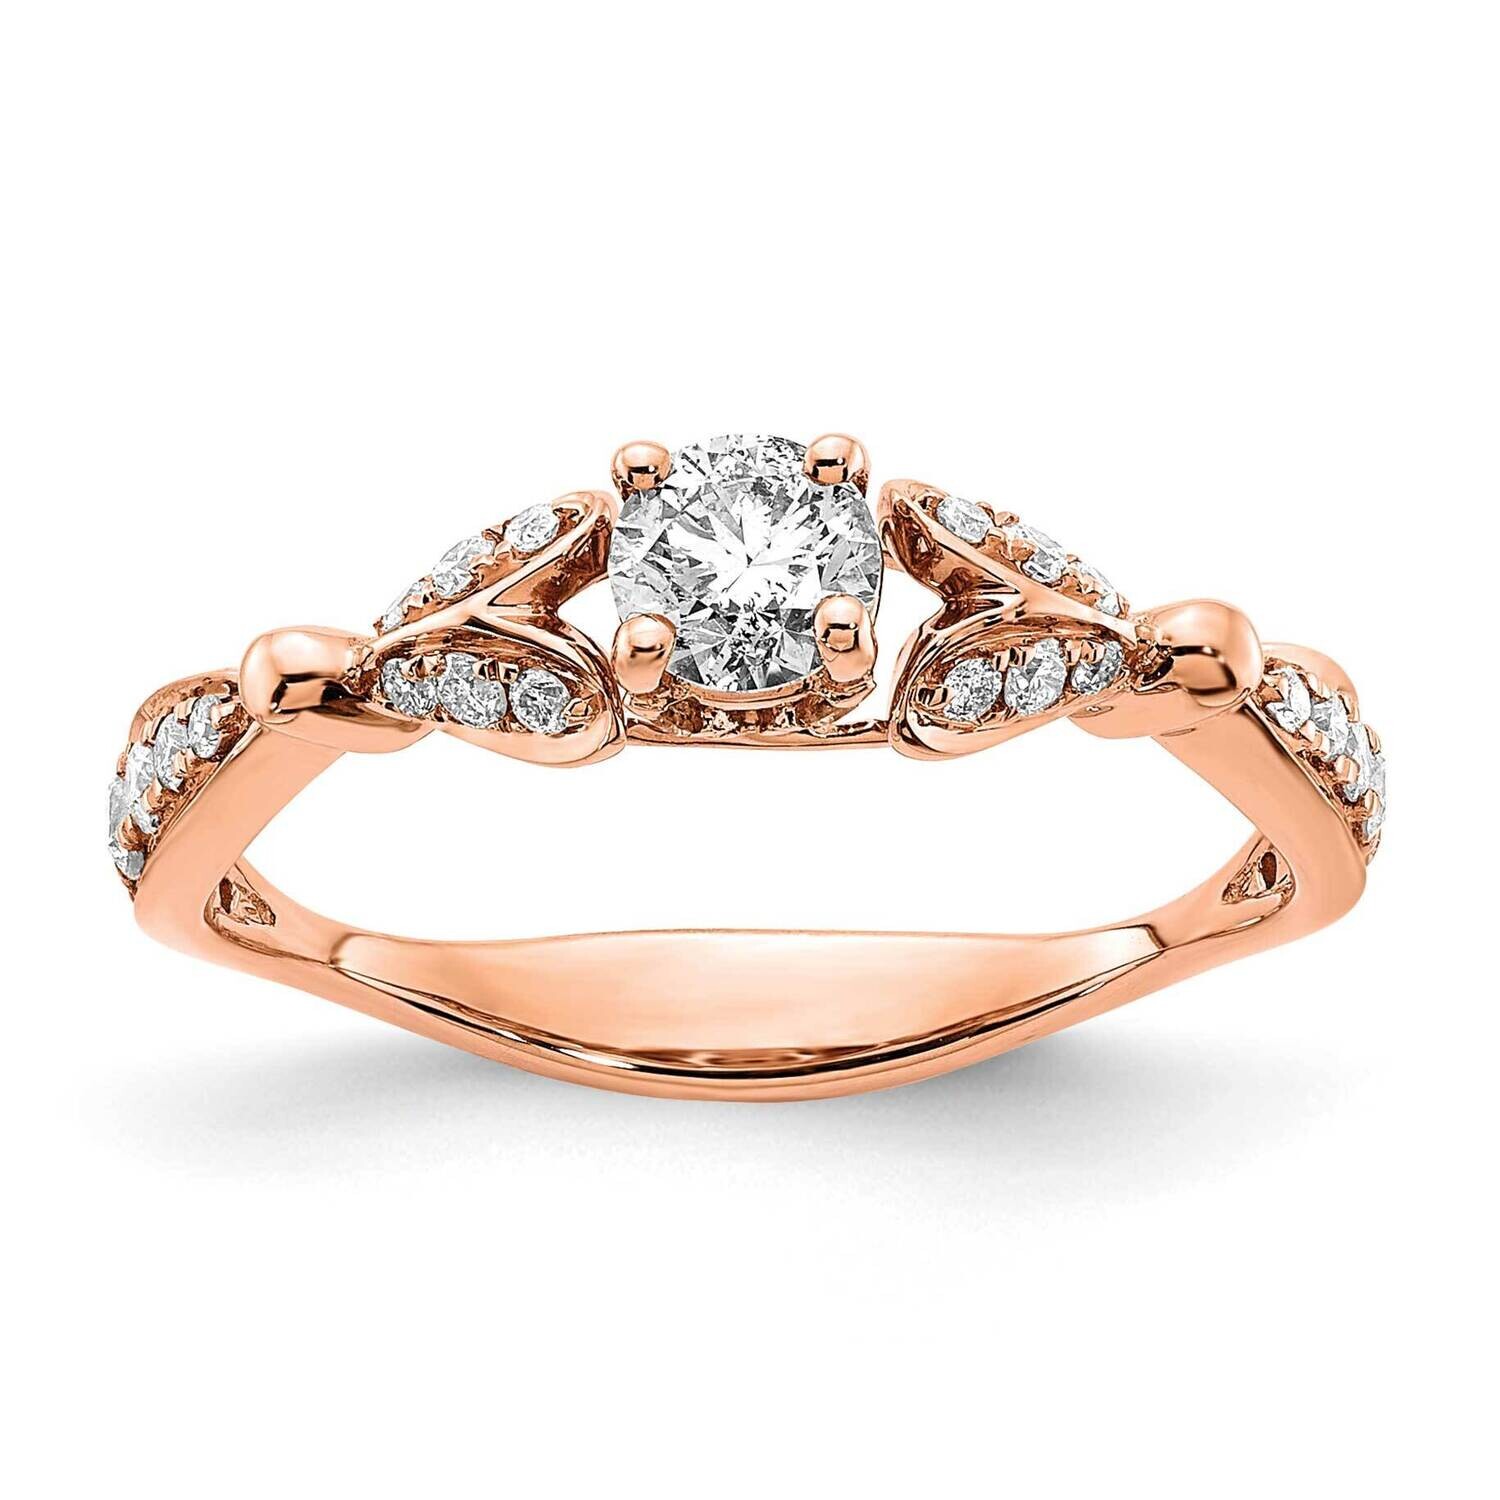 Two Hearts Holds 1/2 Carat 4.5mm Round Center 1/4 Carat Diamond Semi-Mount Engagement Ring 14k Rose Gold RM5902E-033-RAA